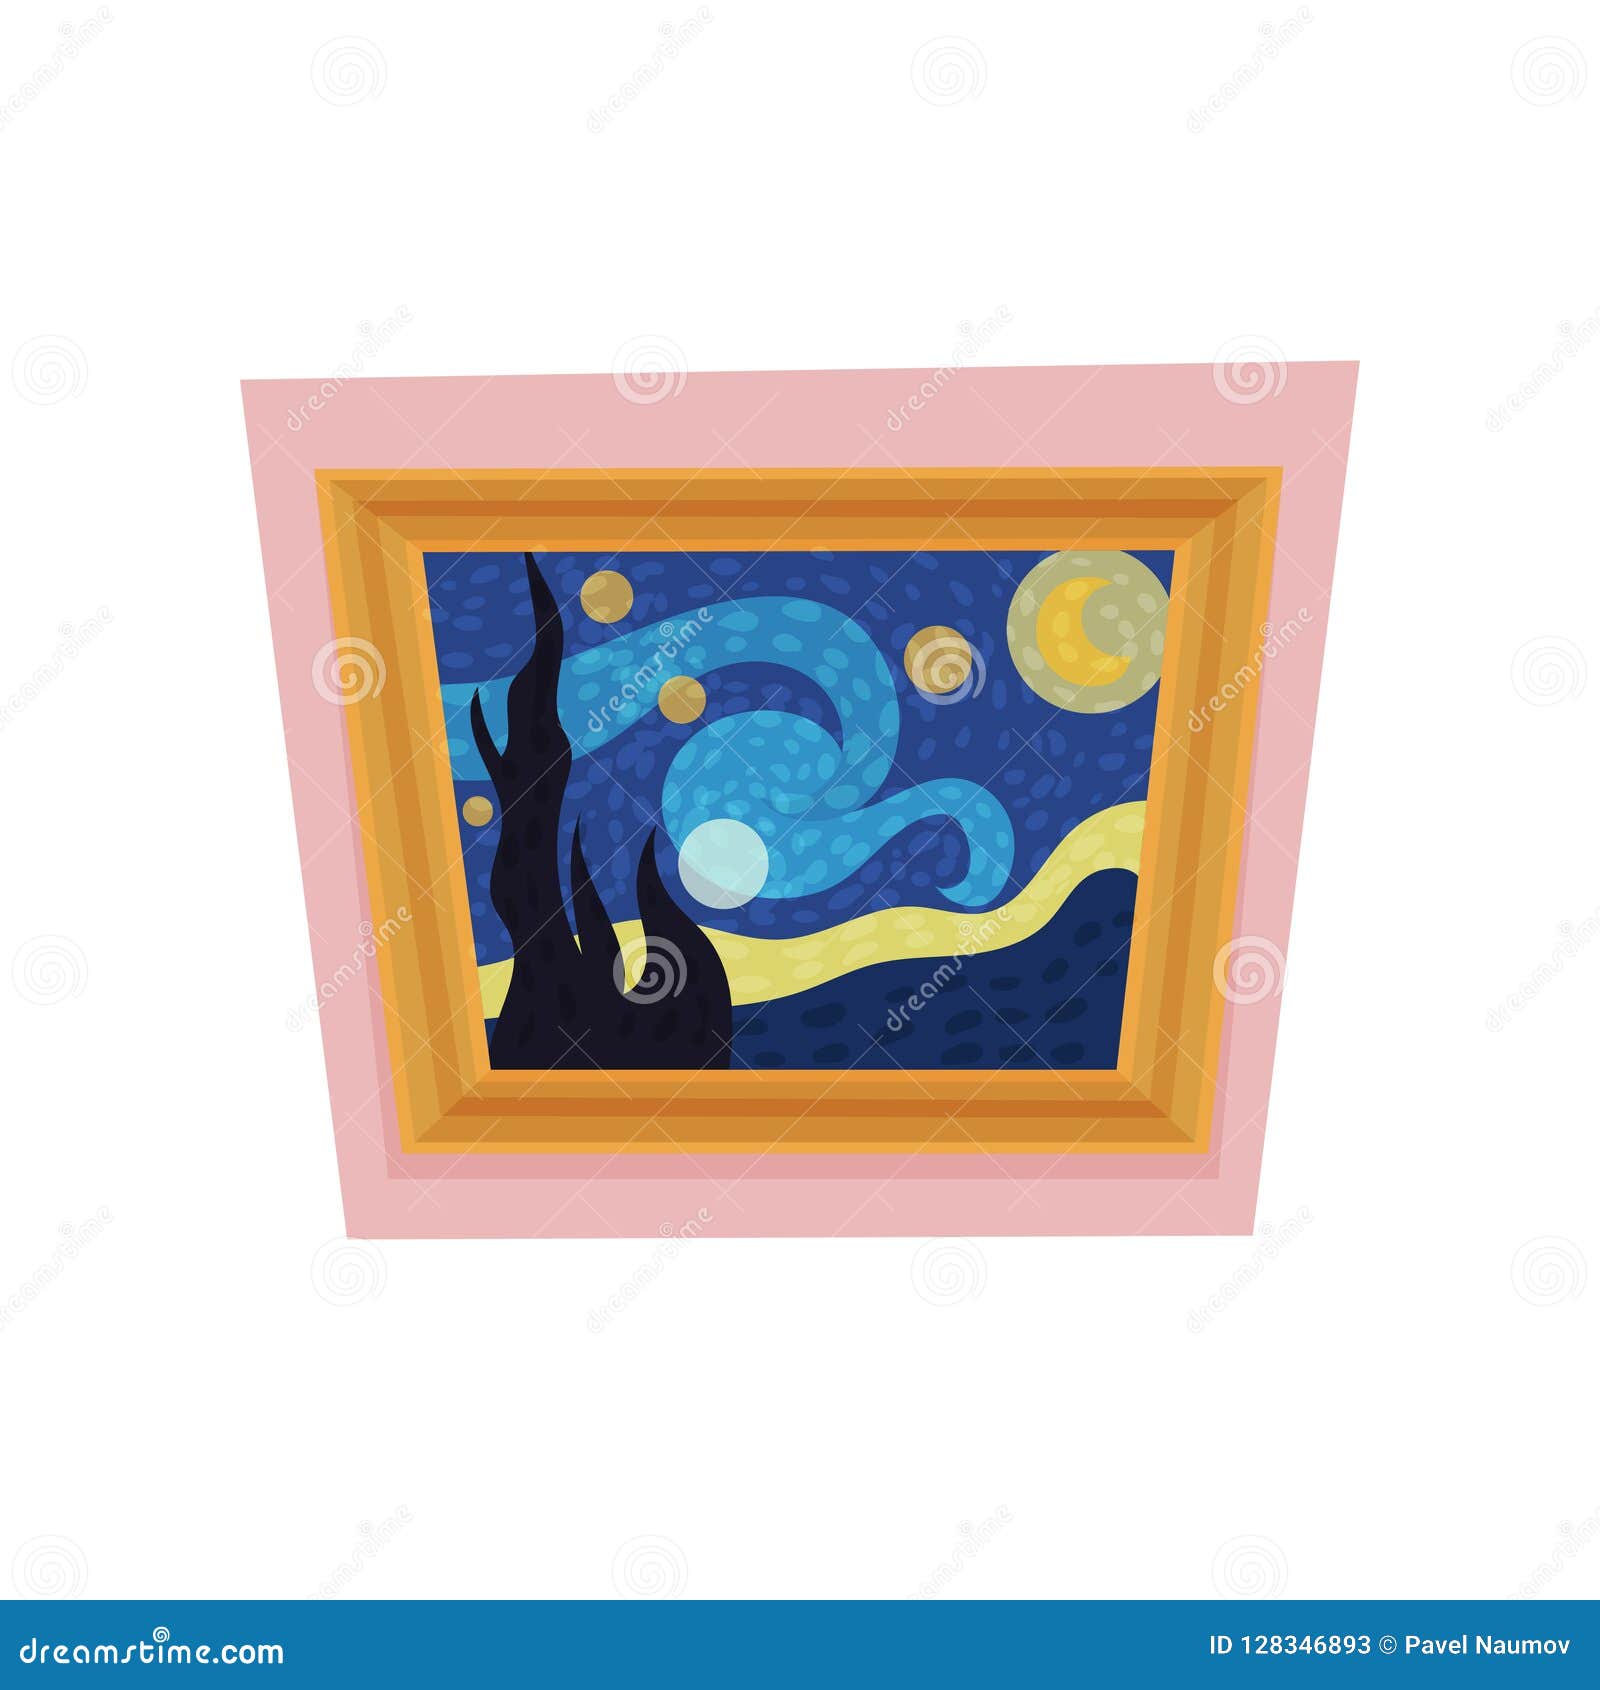 famous painting of starry night by vincent van gogh. museum exhibit. art gallery theme. flat  for advertising